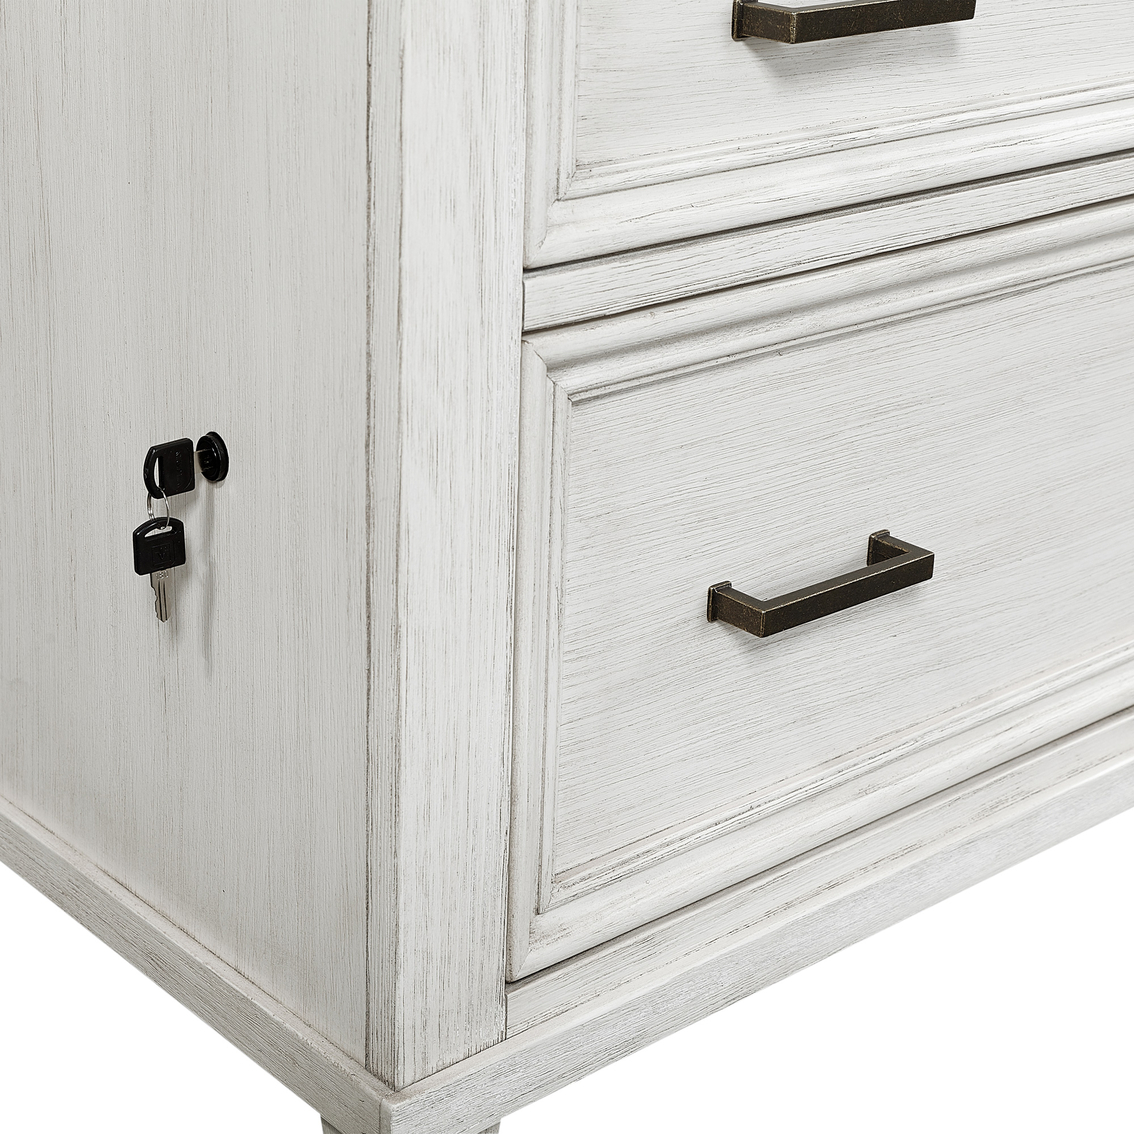 Aspenhome Caraway Lateral File Cabinet - Image 4 of 5